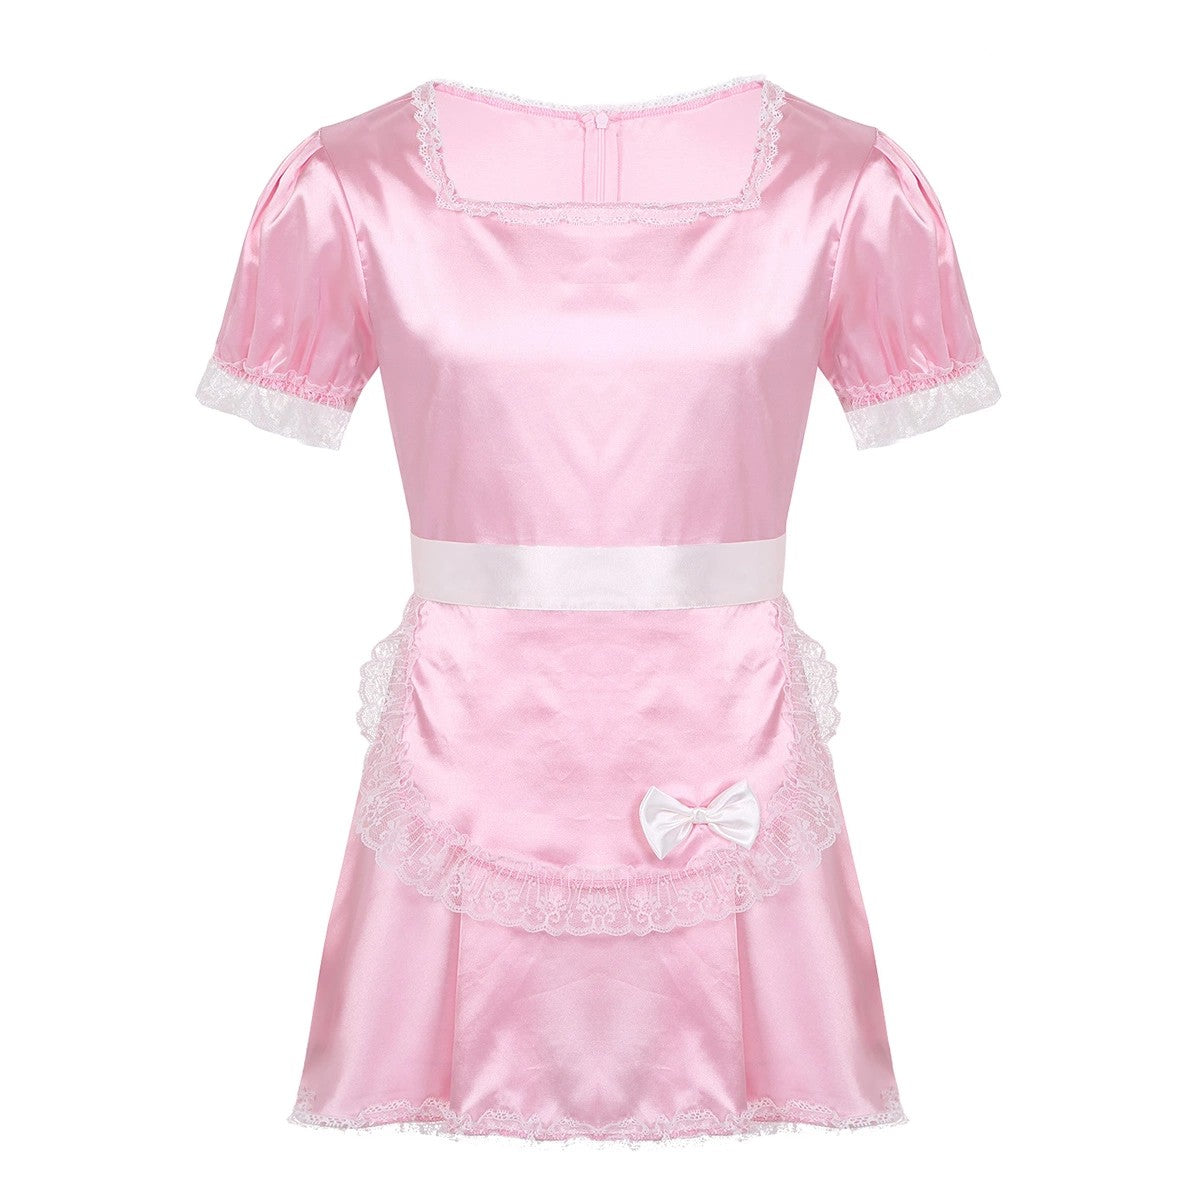 Sissy Maid Satin Dress With Apron Sissy Lux